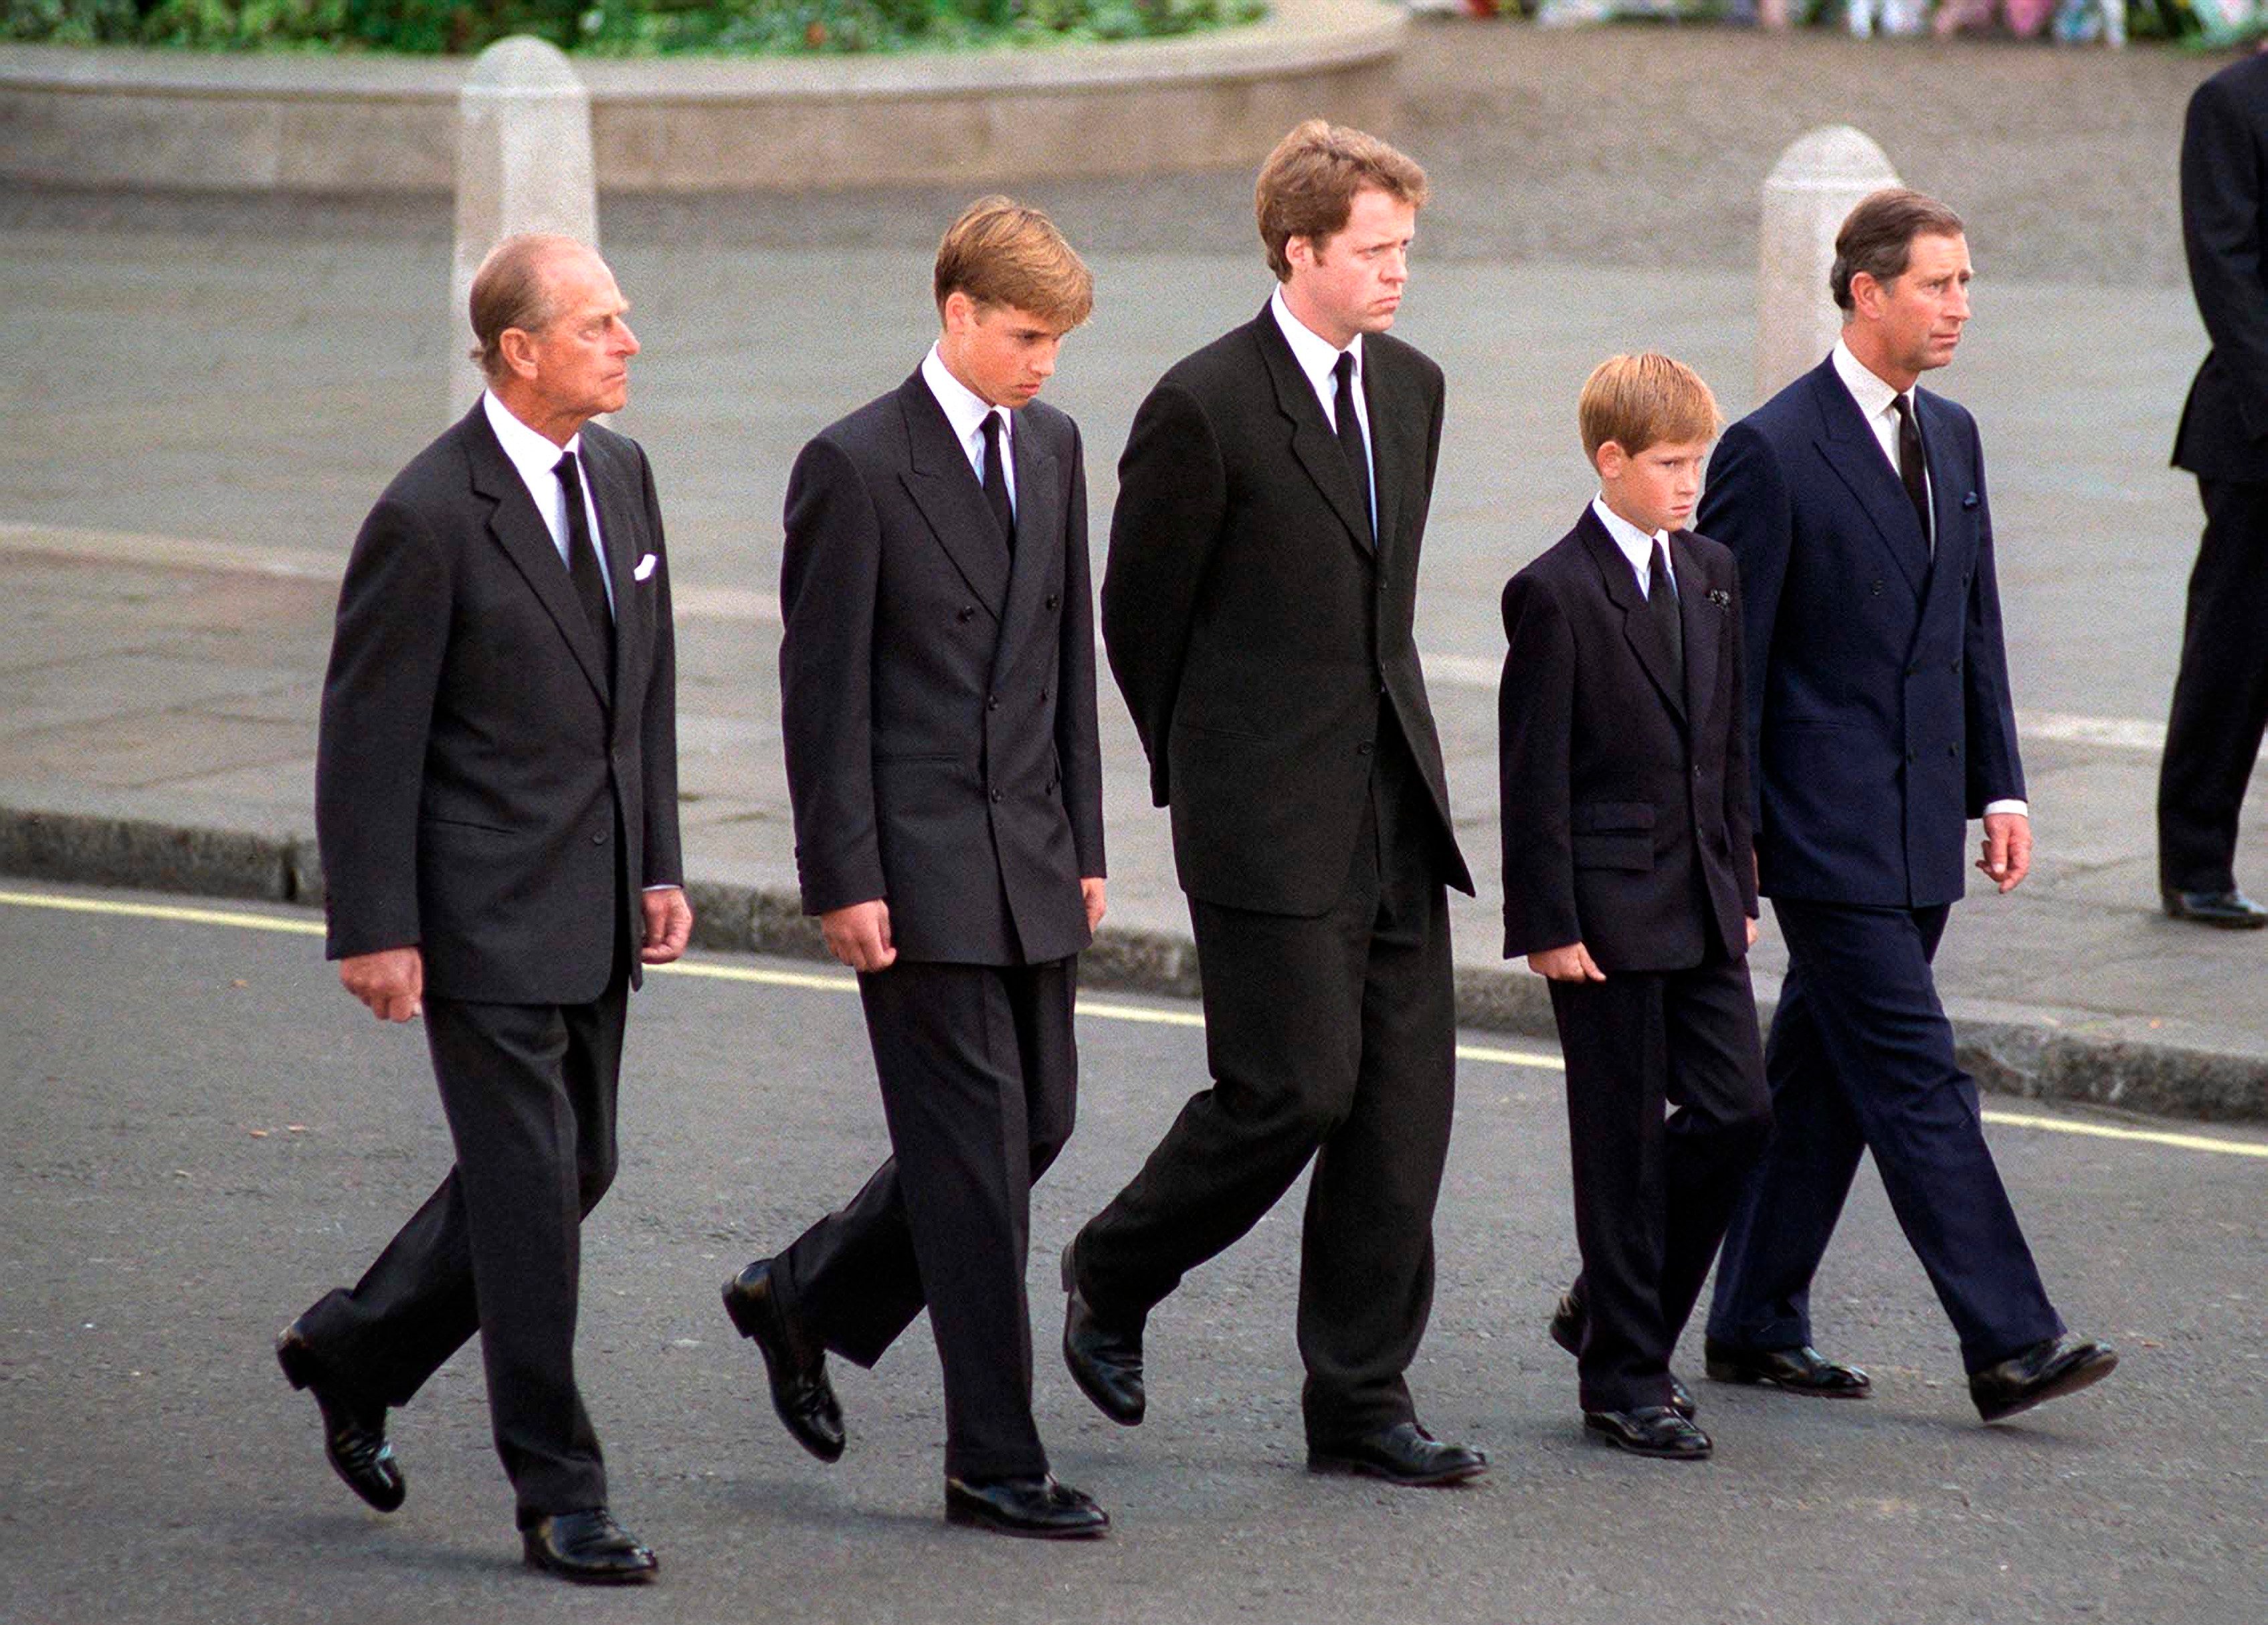 Prince Philip,, Prince William, Earl Spencer, Prince Harry, and Prince Charles walking behind Princess Diana's coffin